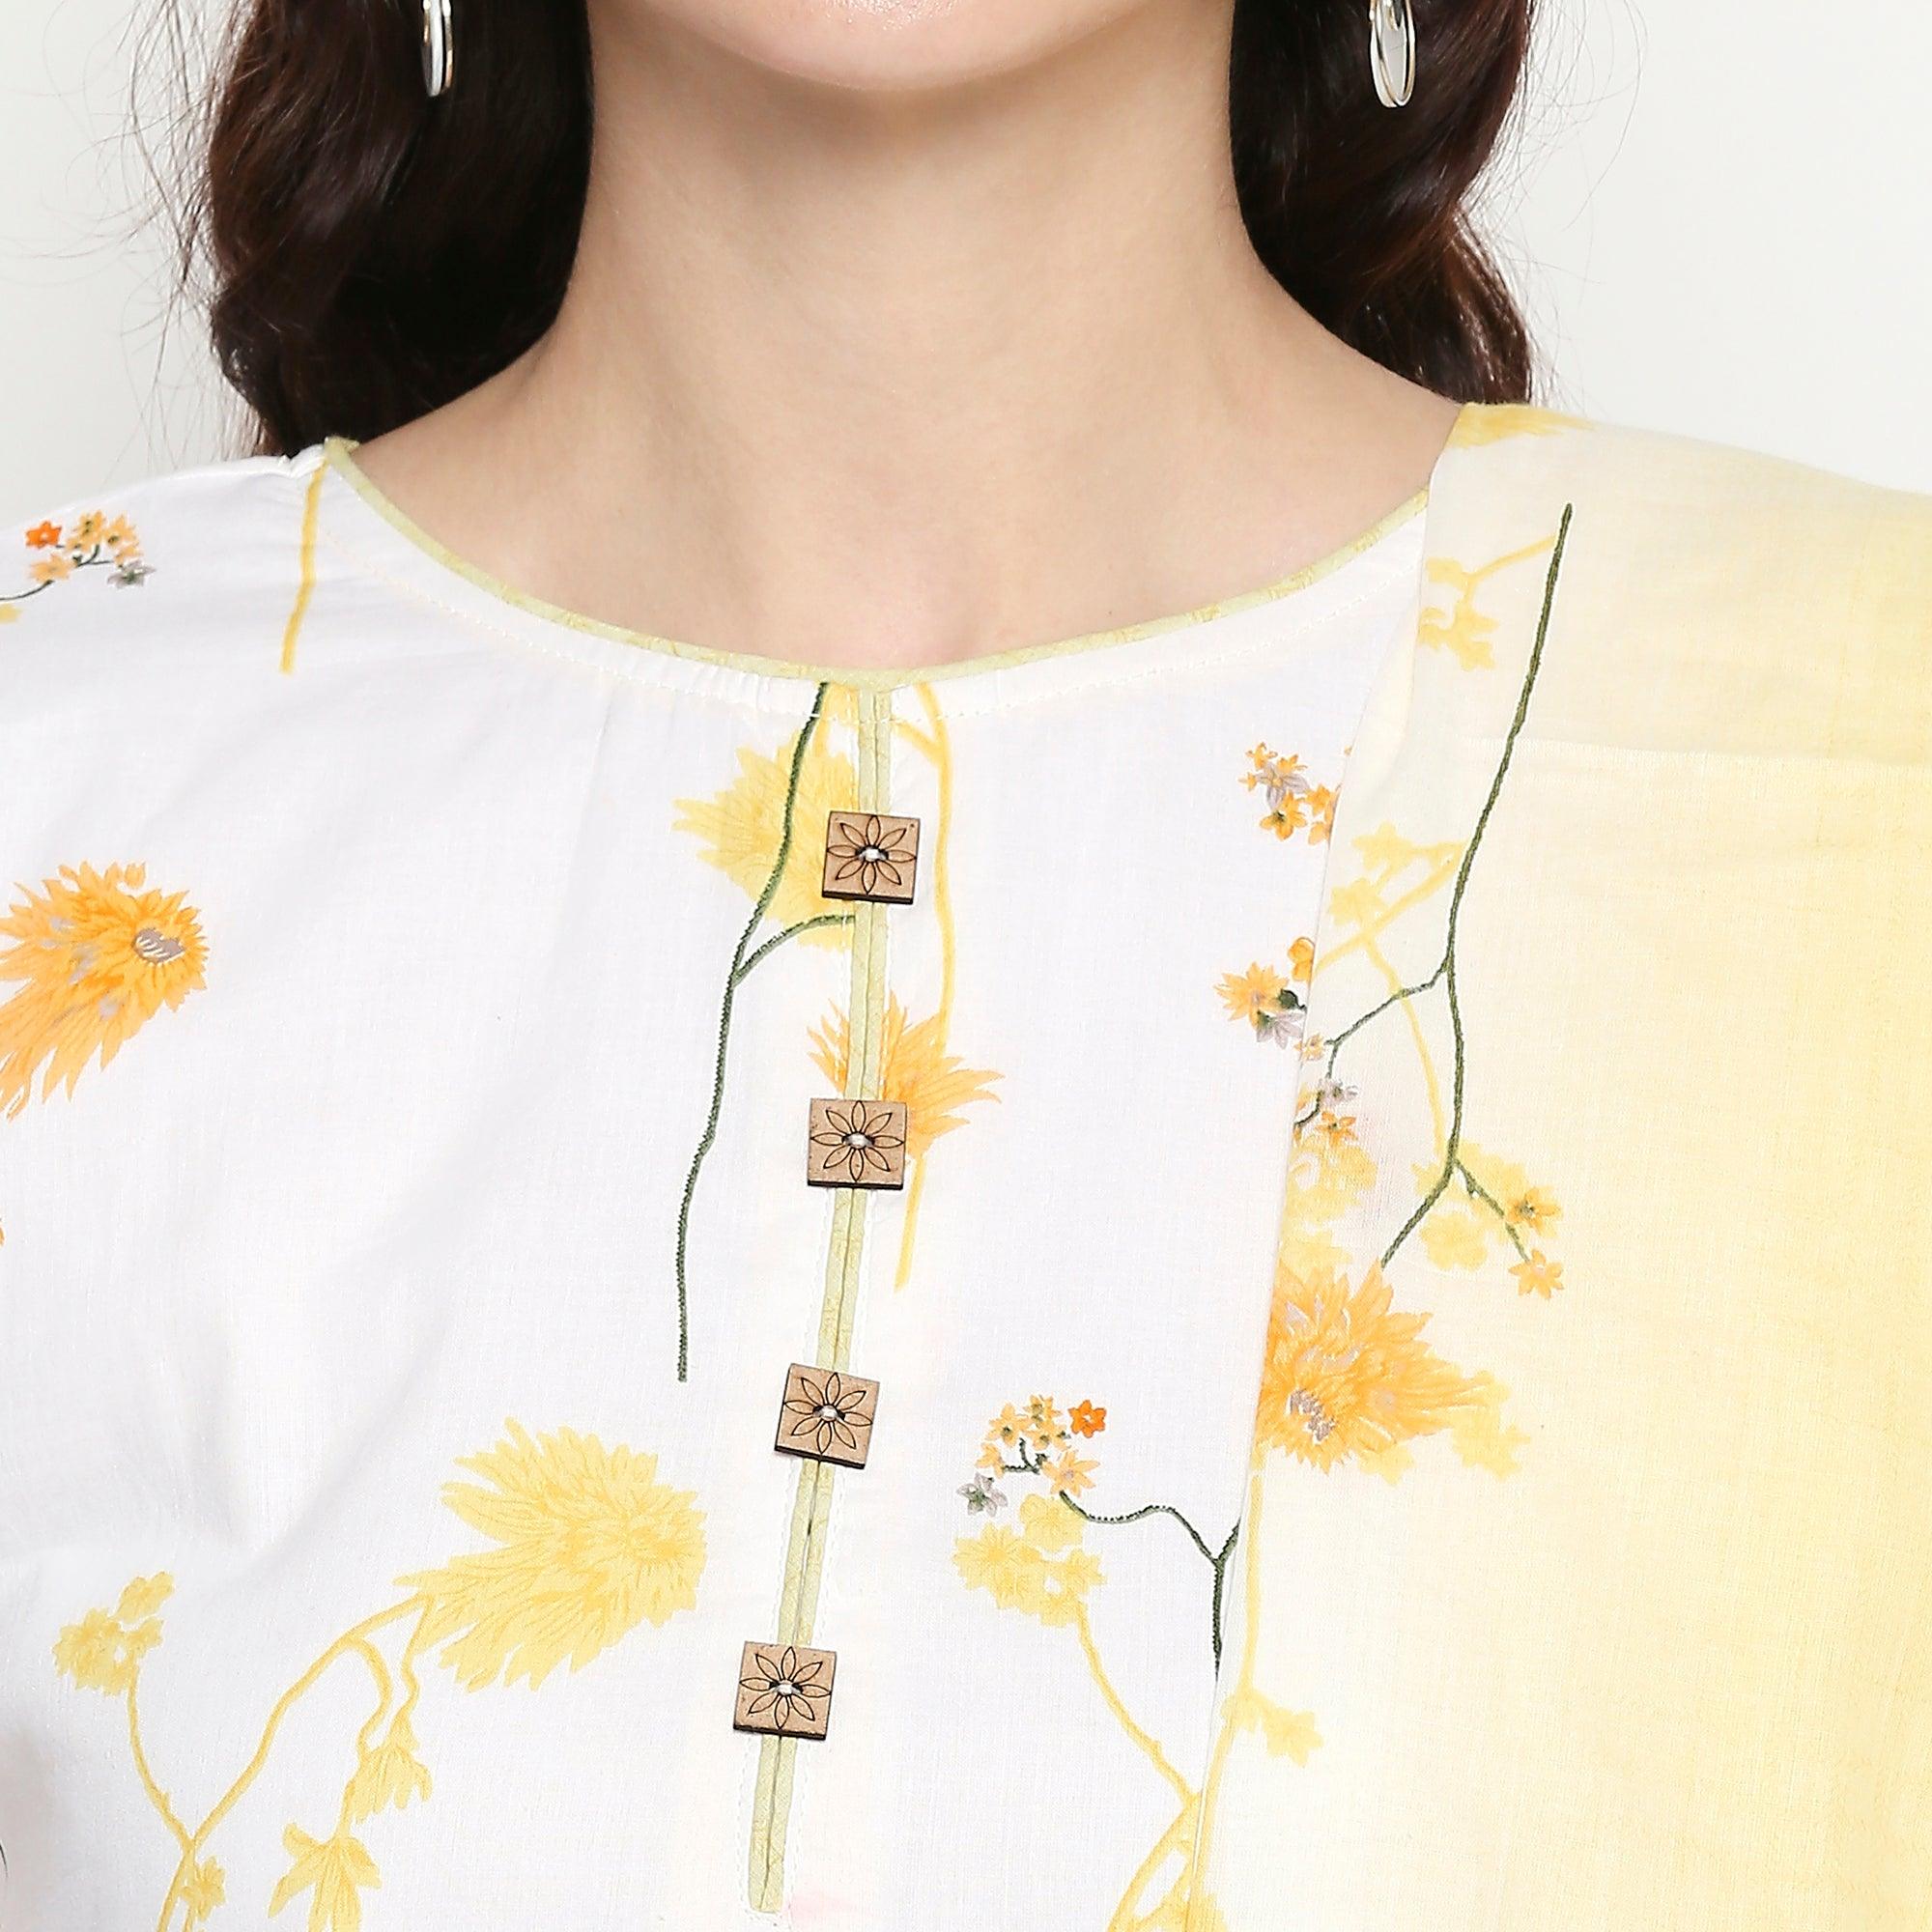 Blooming White-Yellow Colored Casual Wear Floral Printed Cotton Kurti-Pant Set With Dupatta - Peachmode